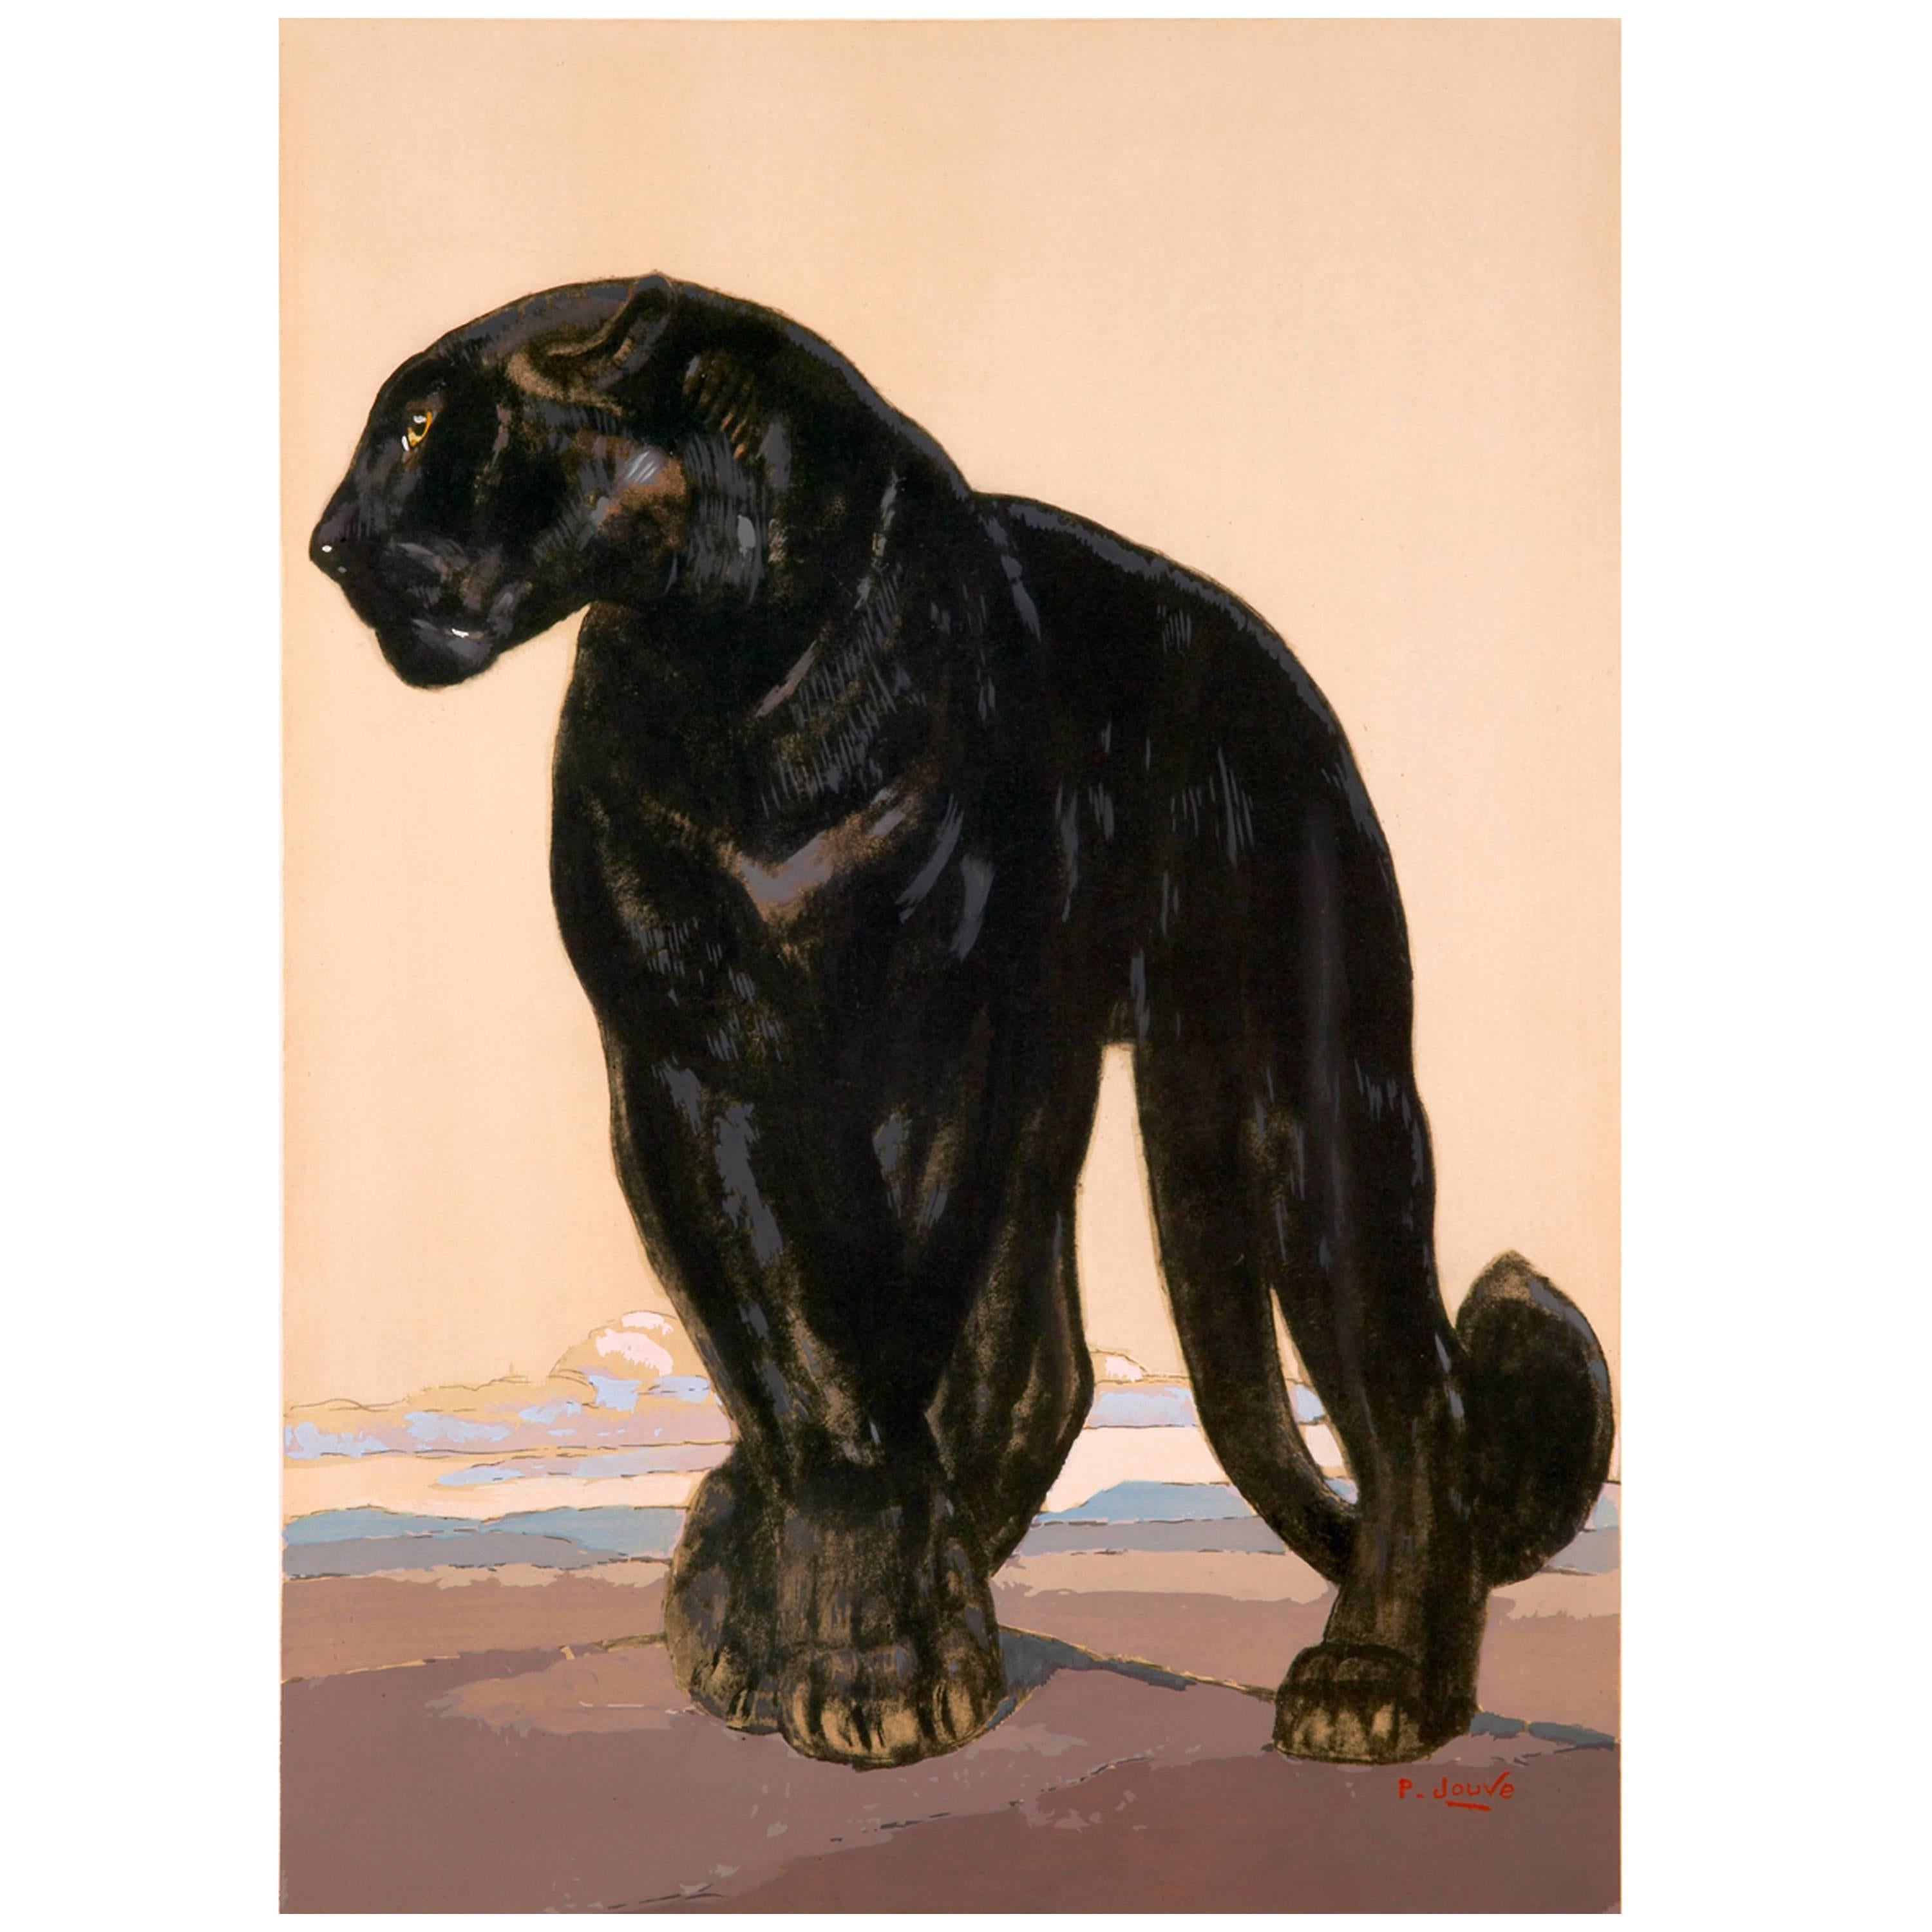 Black Panther Standing by Paul Jouve